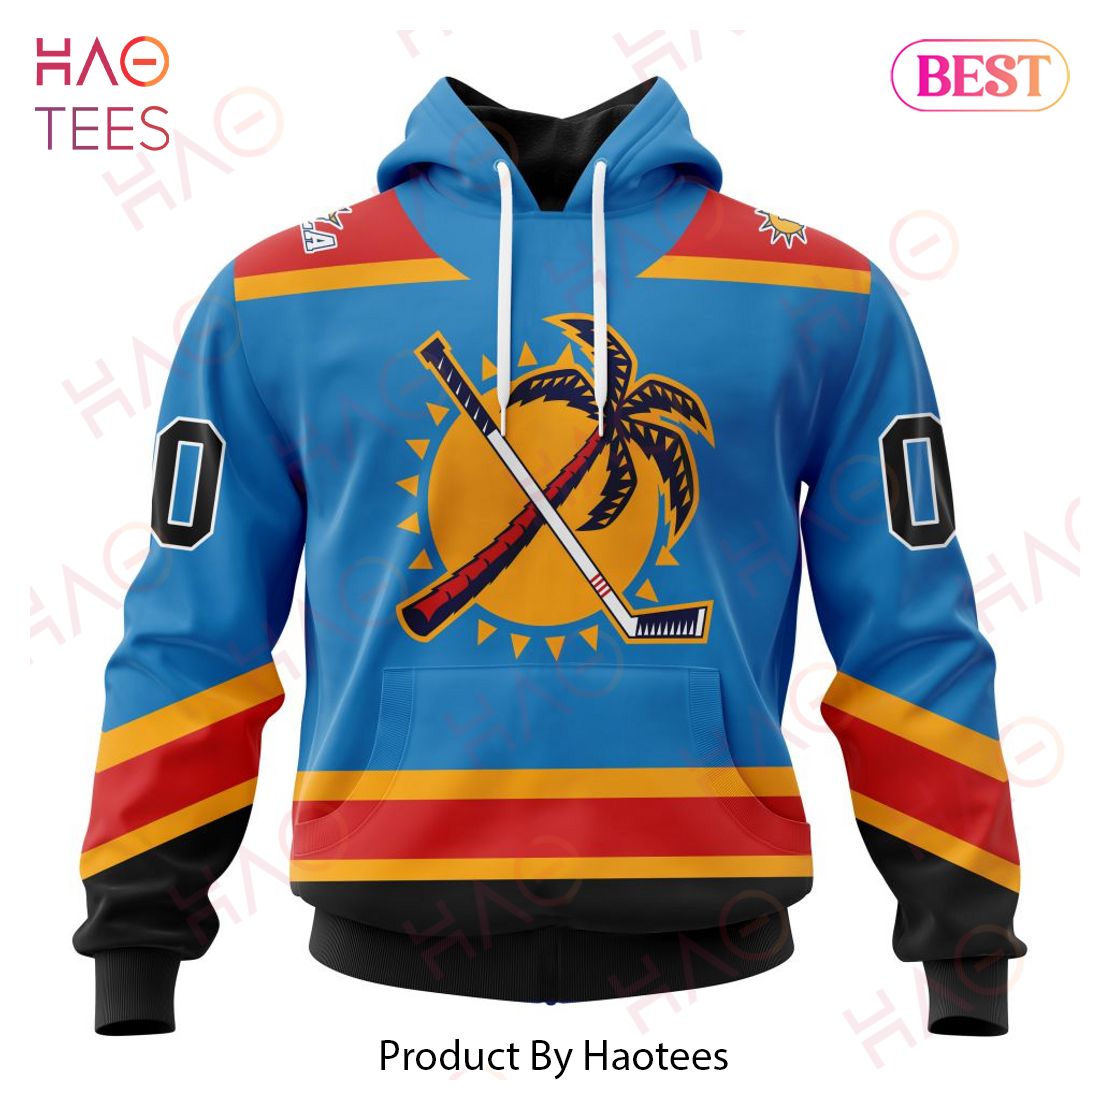 FHN Today: NHL, Florida Panthers Set Sail with New Reverse Retro